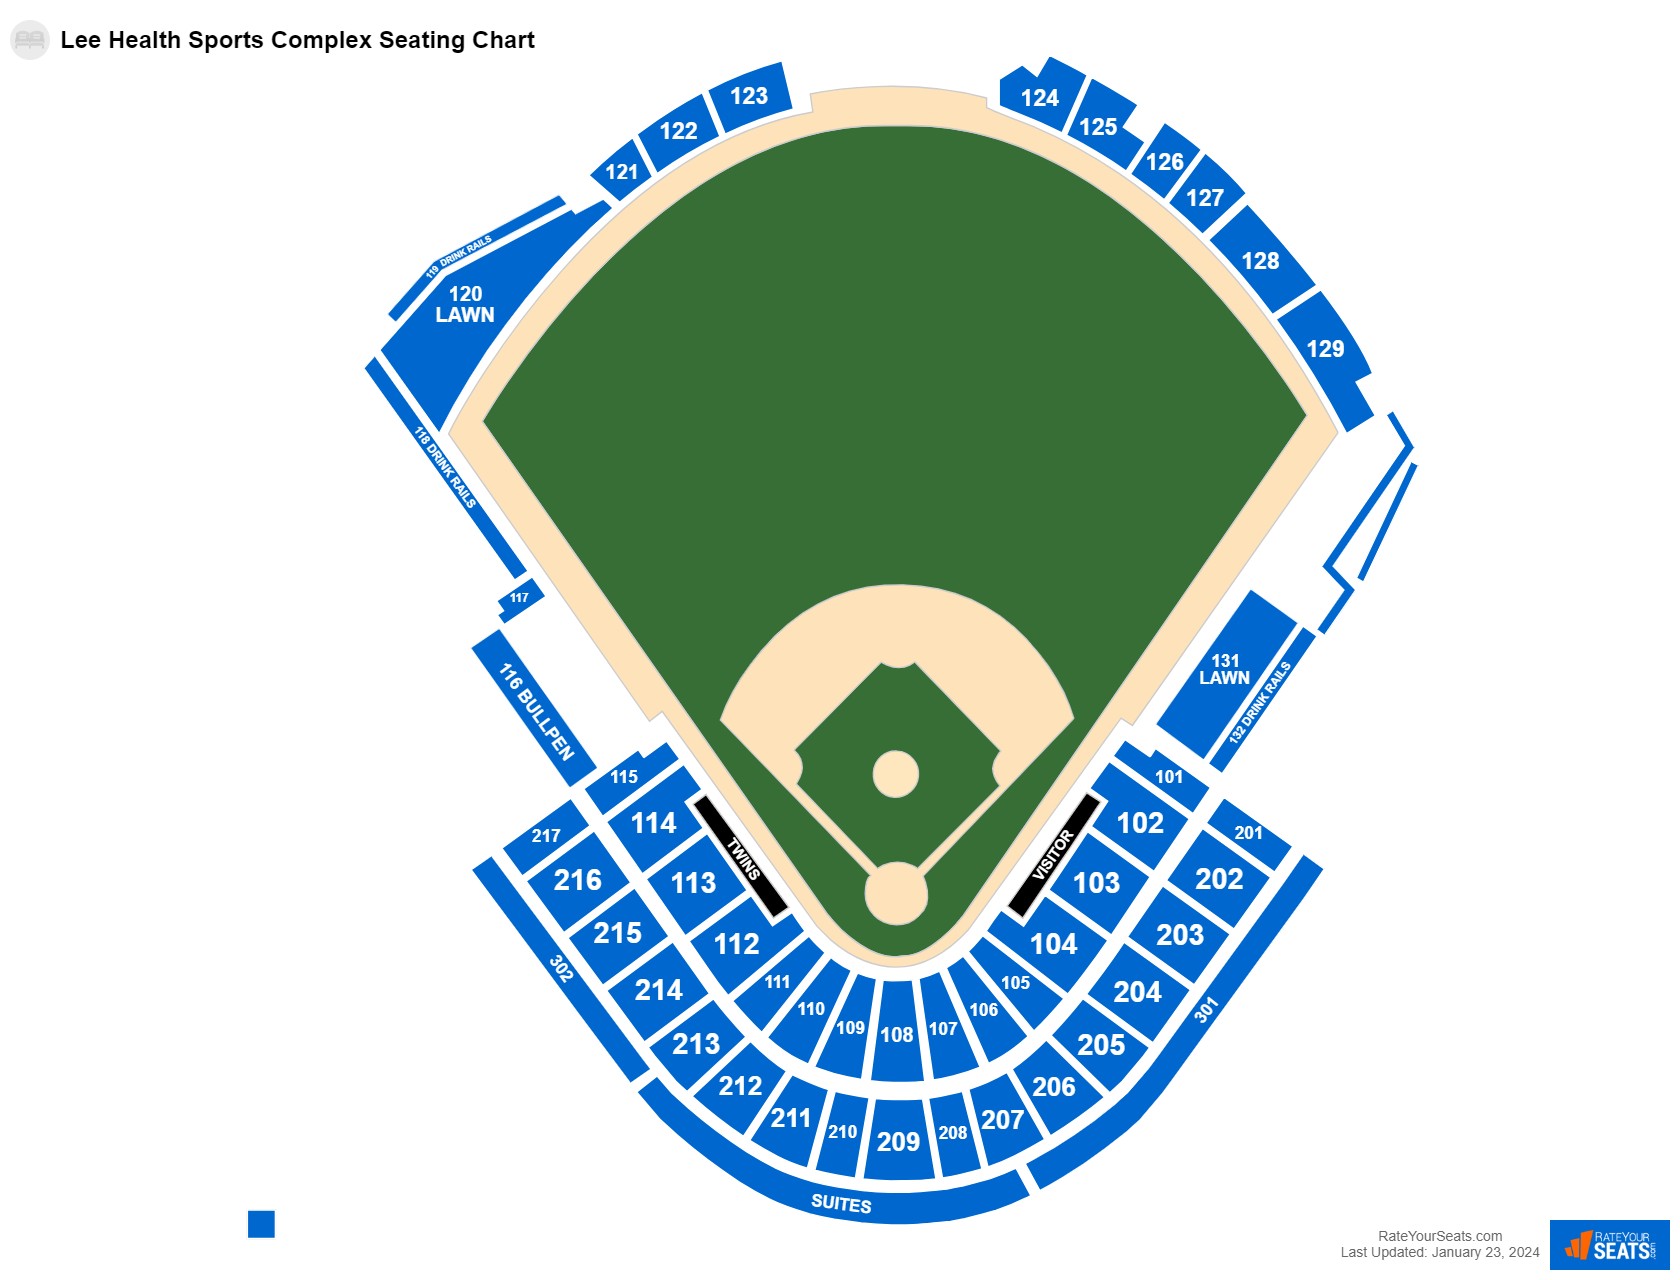 Baseball seating chart at Lee Health Sports Complex